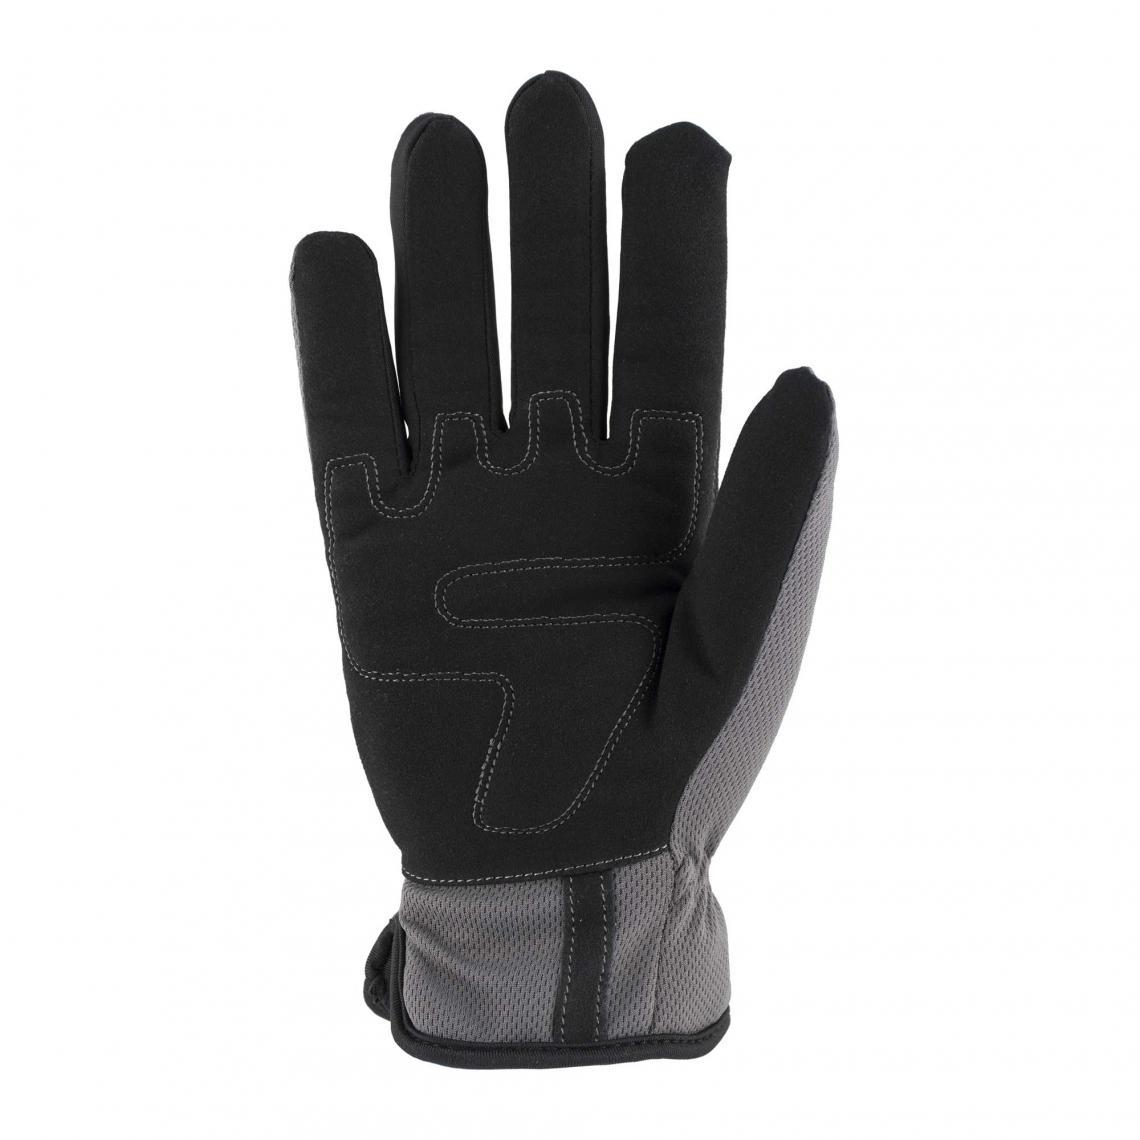 Goodyear Dexterity Thinsulate Lined Winter Work Gloves Work Gloves and Hats - Cleanflow